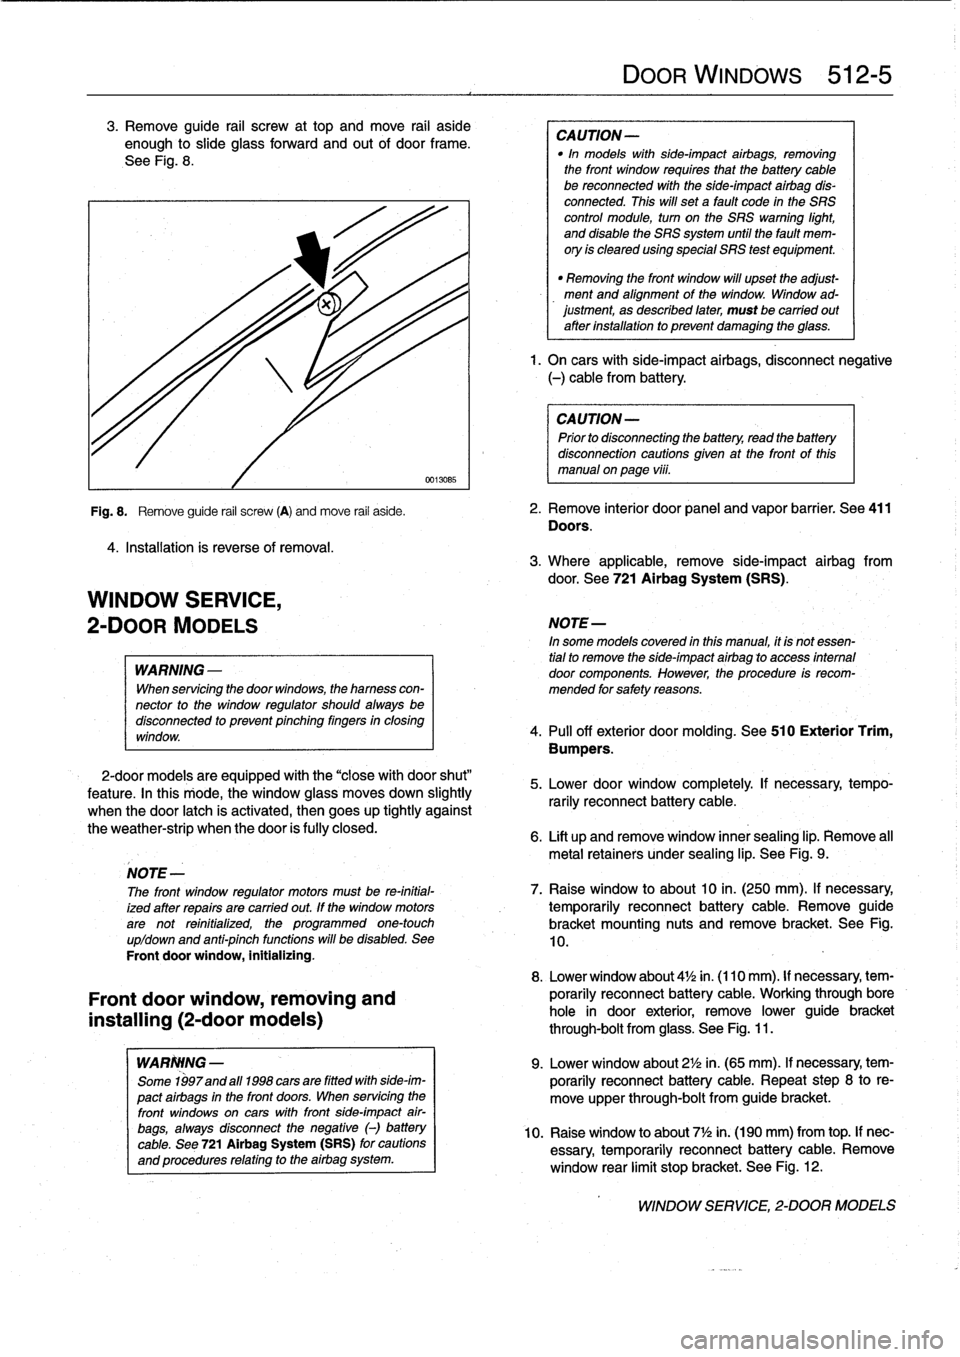 BMW 318i 1998 E36 Workshop Manual 
3
.
Remove
guide
rail
screw
at
top
and
move
rail
aside
enough
to
slide
glass
forward
and
out
of
door
frame
.

See
Fig
.
8
.

4
.
Installation
is
reverse
of
removal
.

WINDOW
SERVICE,

2-DOOR
MODELS

